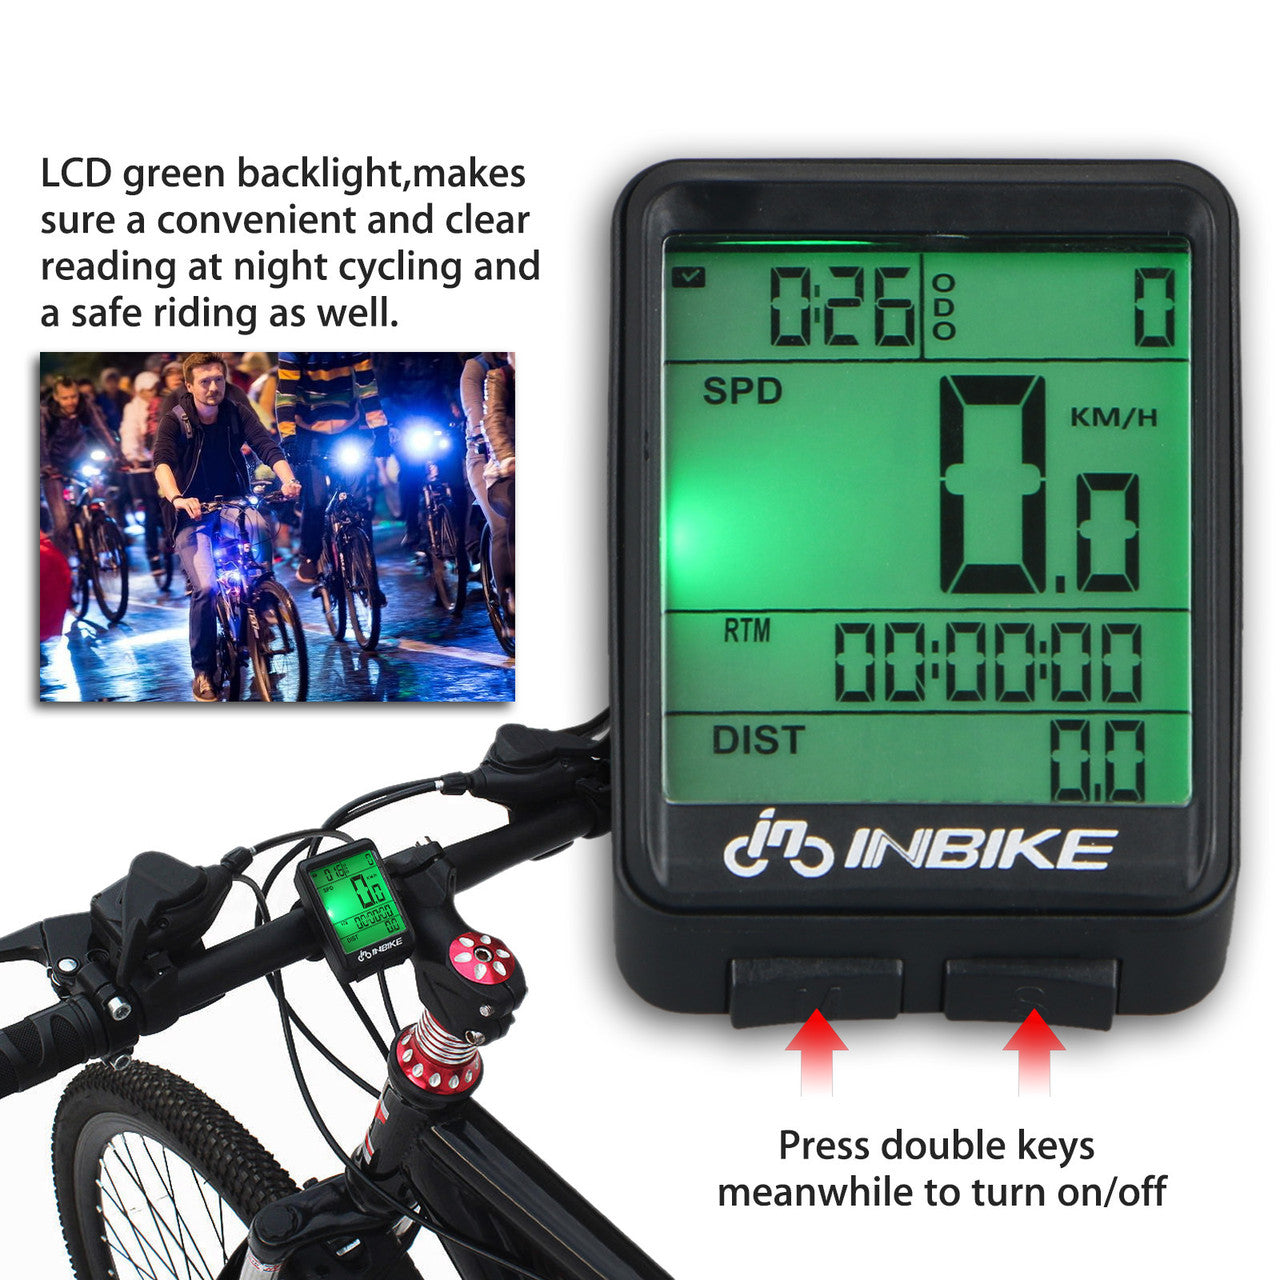 Waterproof Wireless Bike Speedometer, Digital Cycling Computer Speedometer Odometer, LCD Backlight and 11 Functions Speedometer, for Use When Training, Hiking, Climbing, Riding